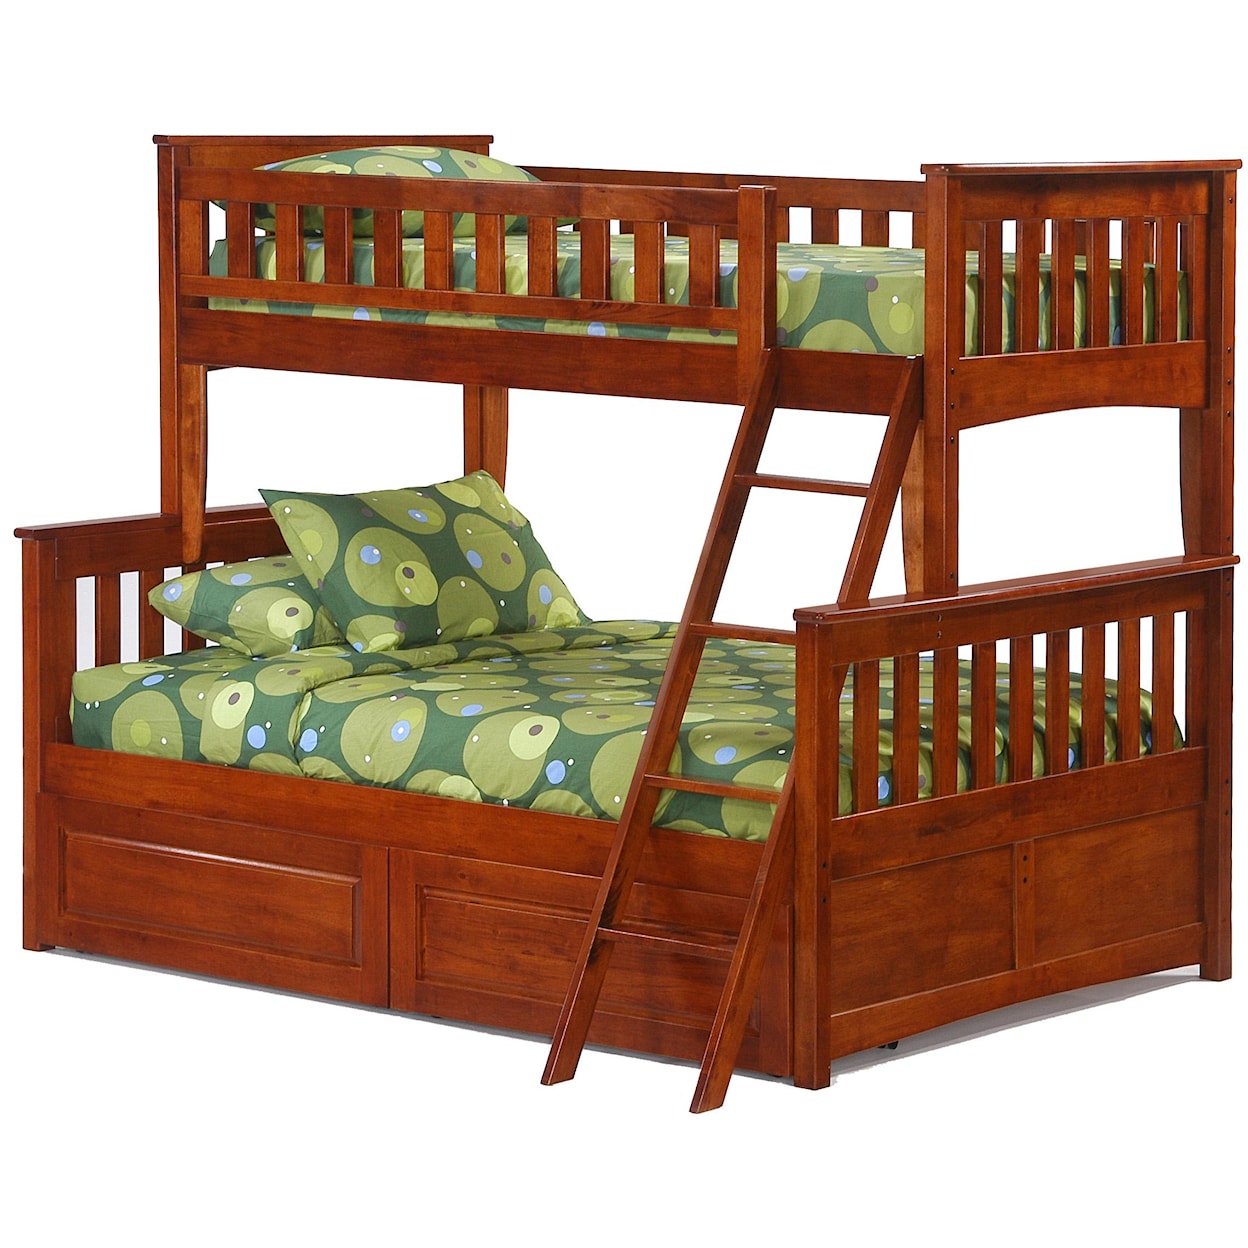 Night & Day Furniture Spice Twin/Full Bunk Bed with Storage